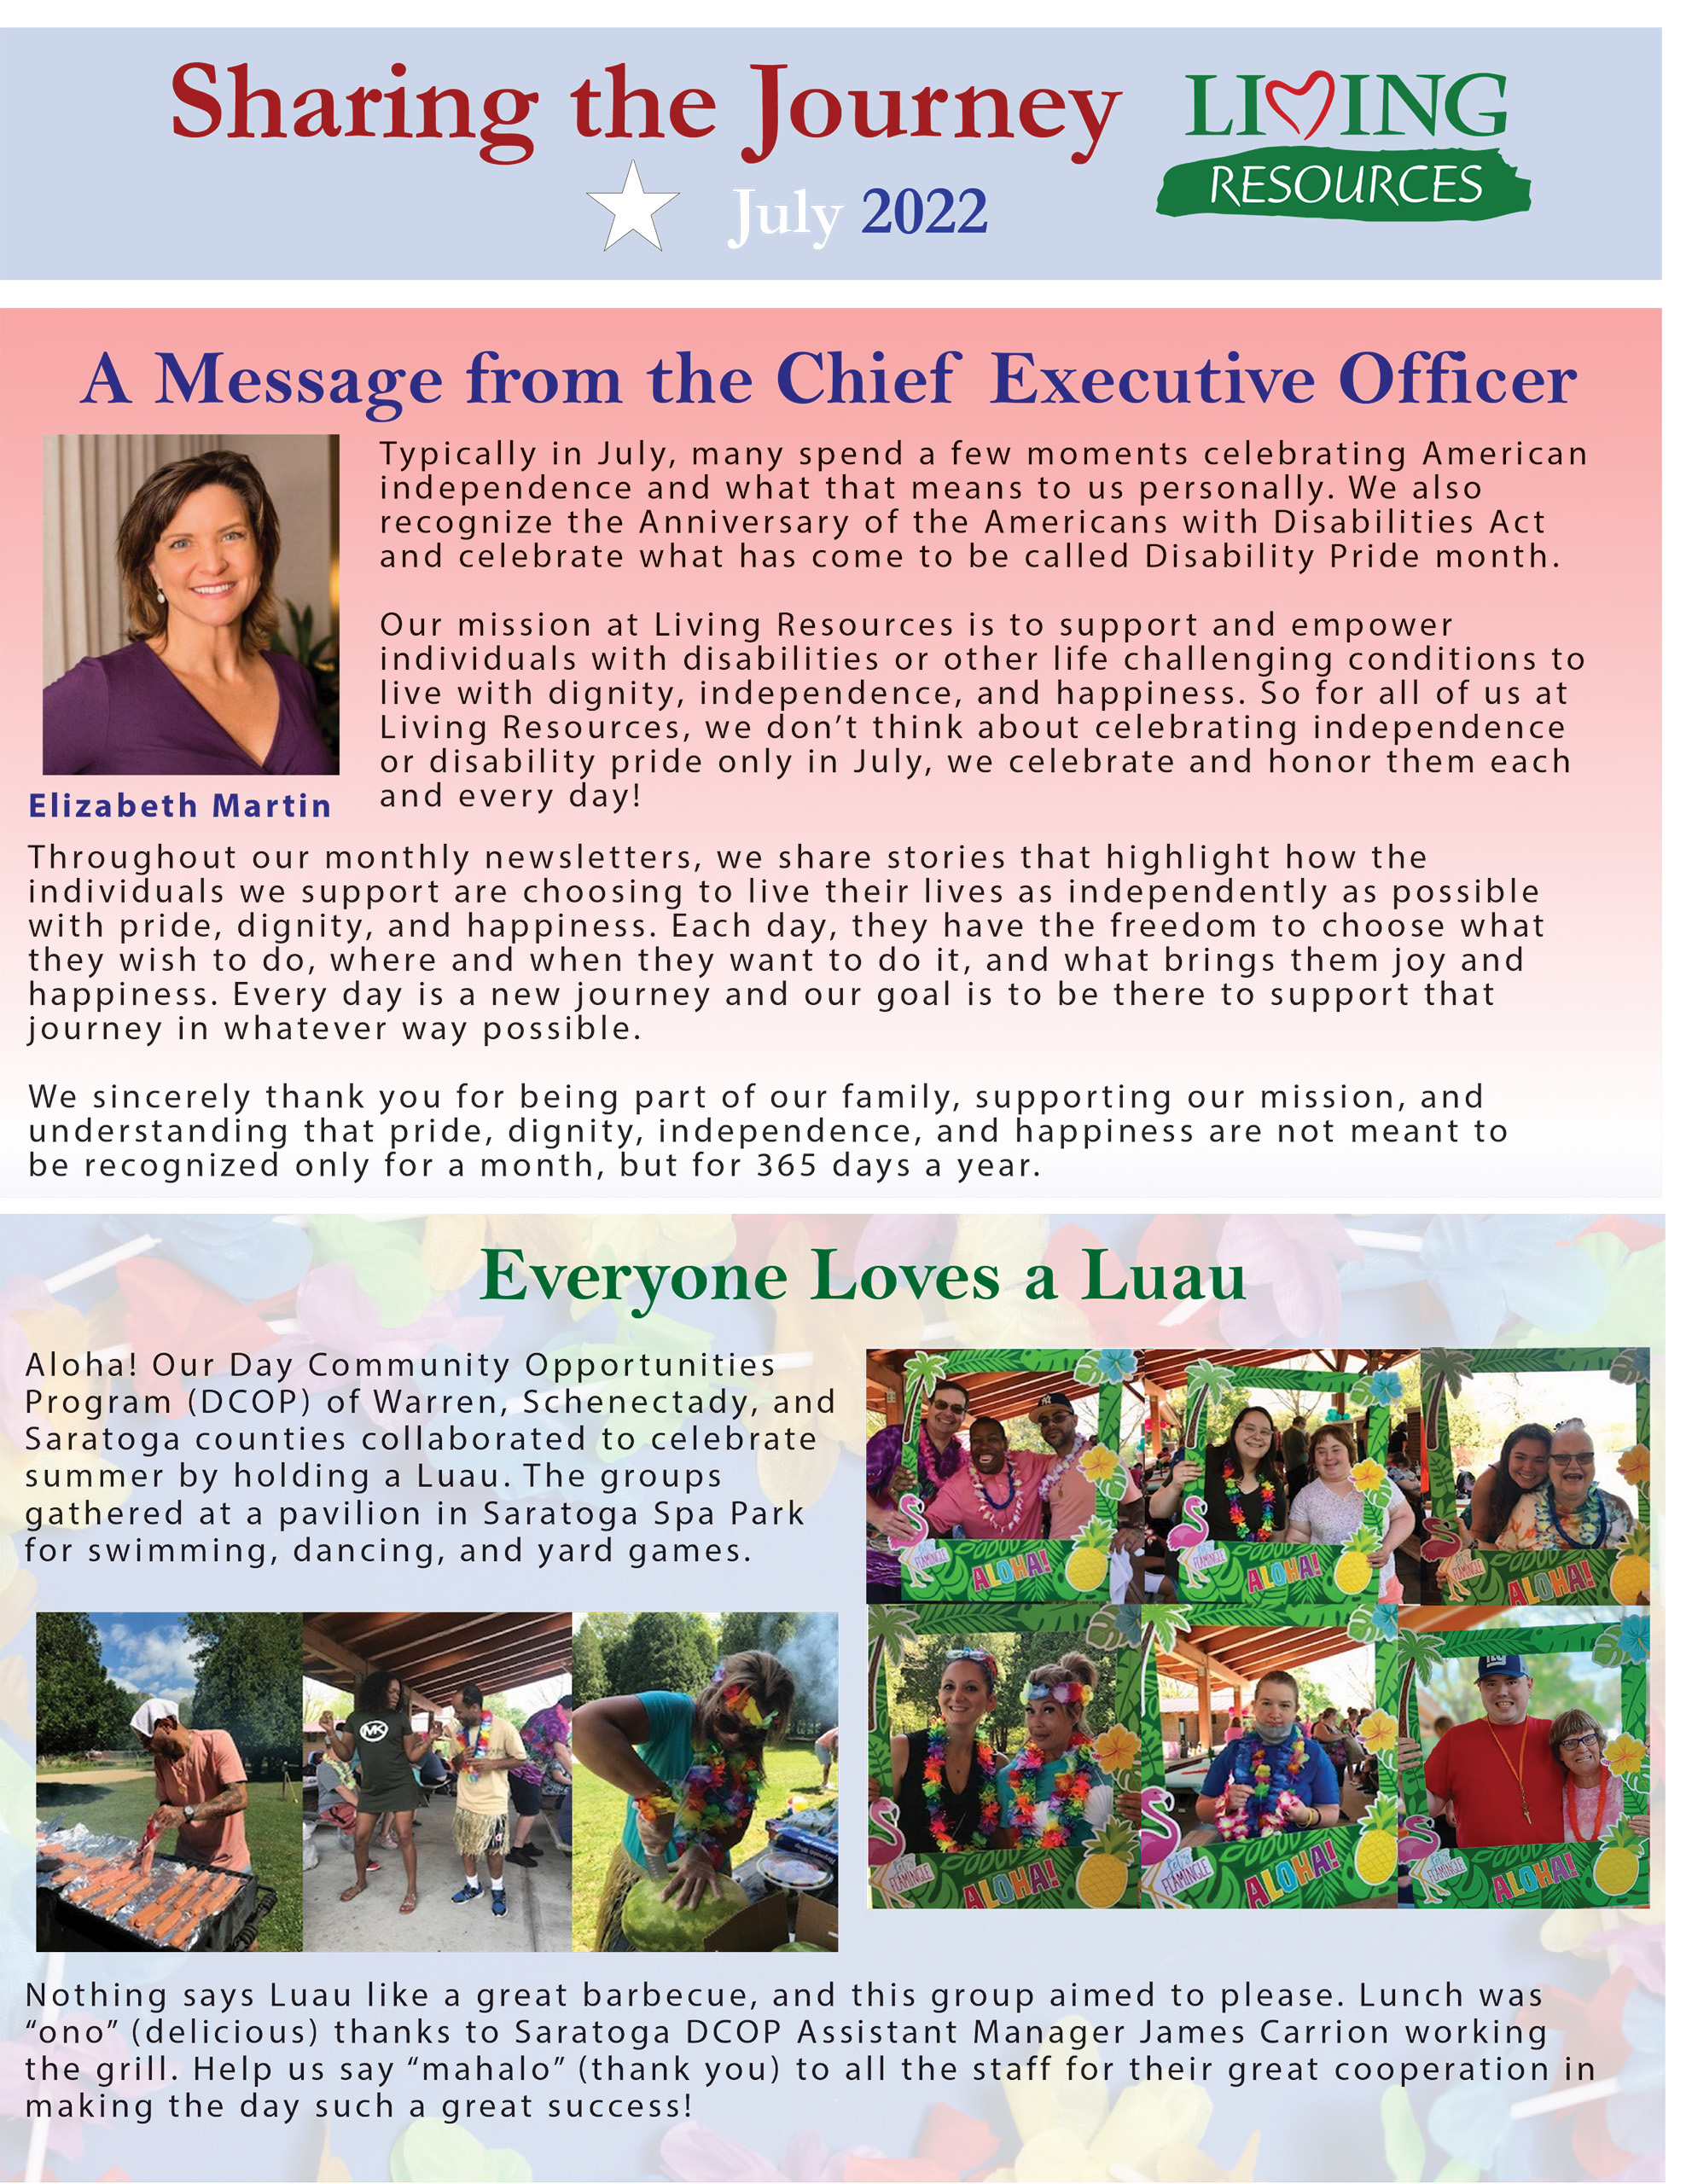 Sharing the Journey Newsletter July 2022